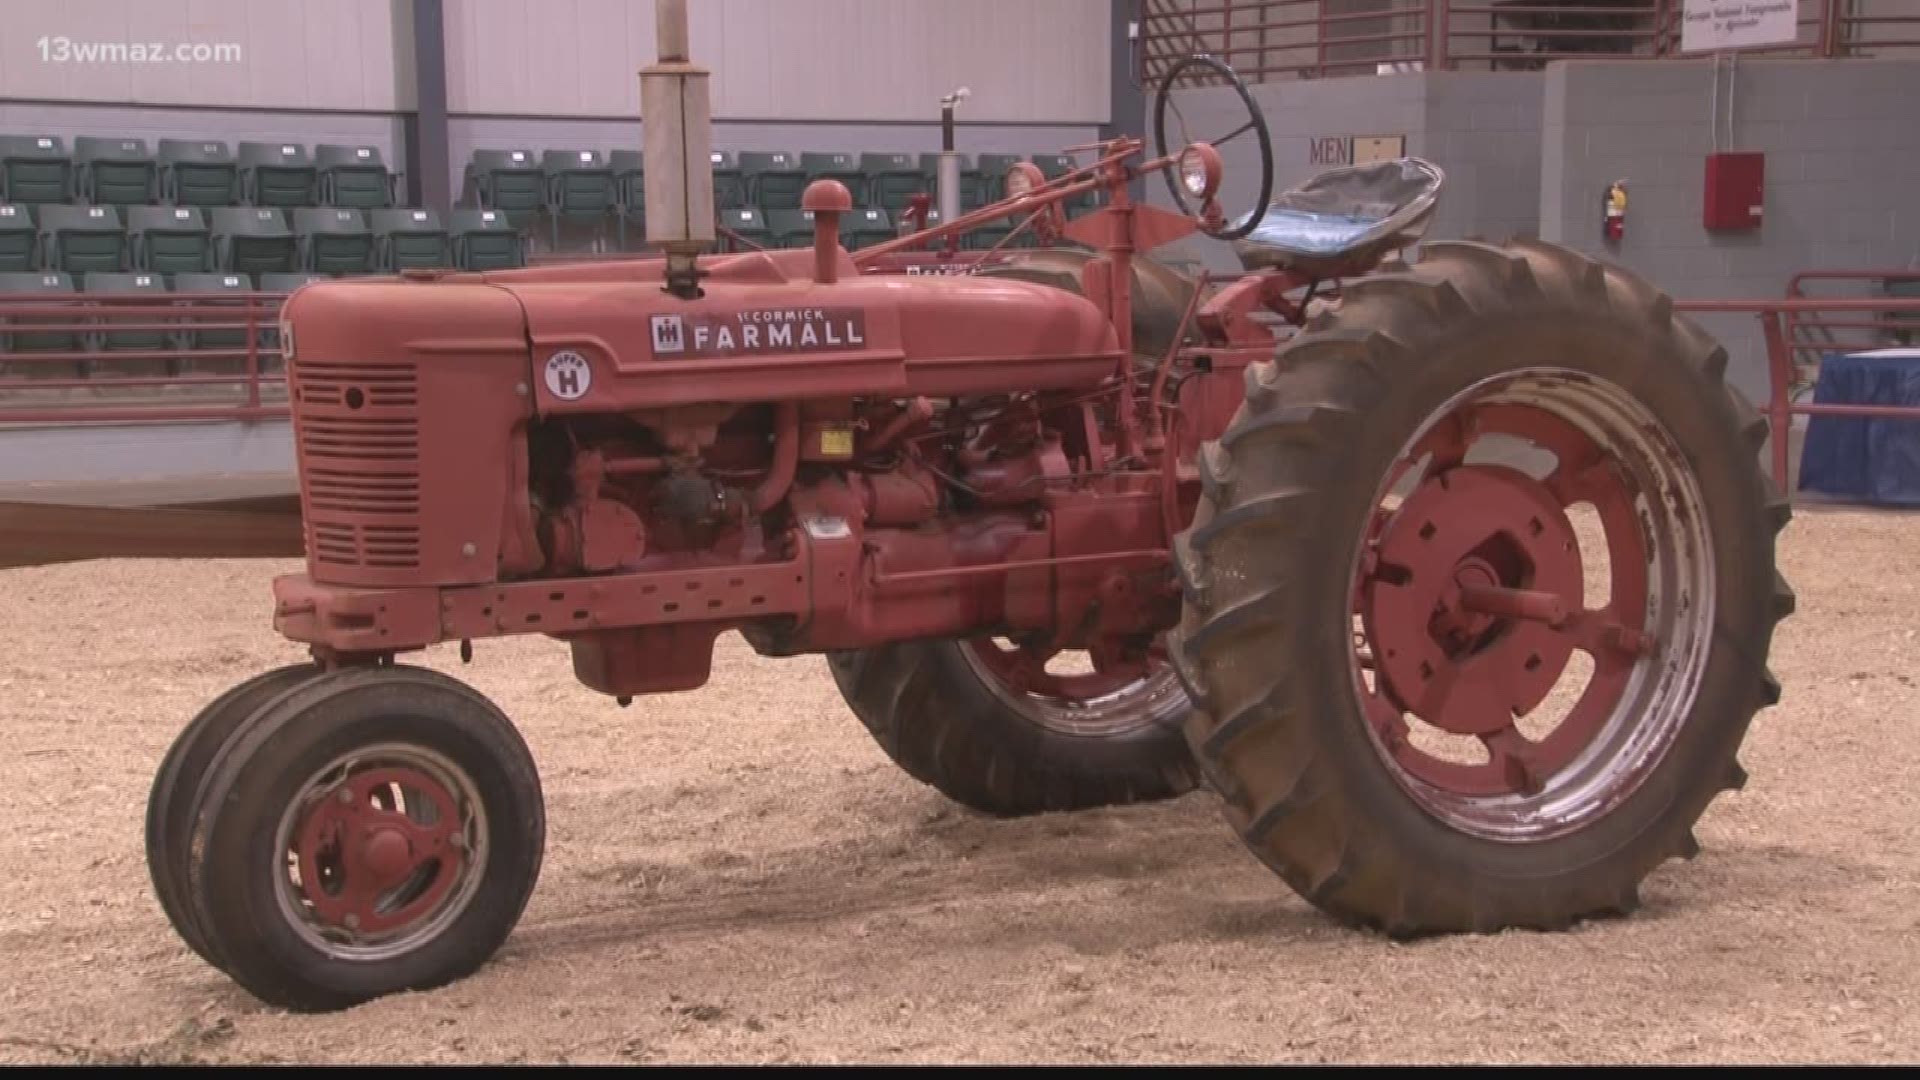 The Georgia National Fairgrounds in Perry held their first Antique Agriculture Show, which showcased 175 pieces of heritage farm equipment. It was a 3-day event.